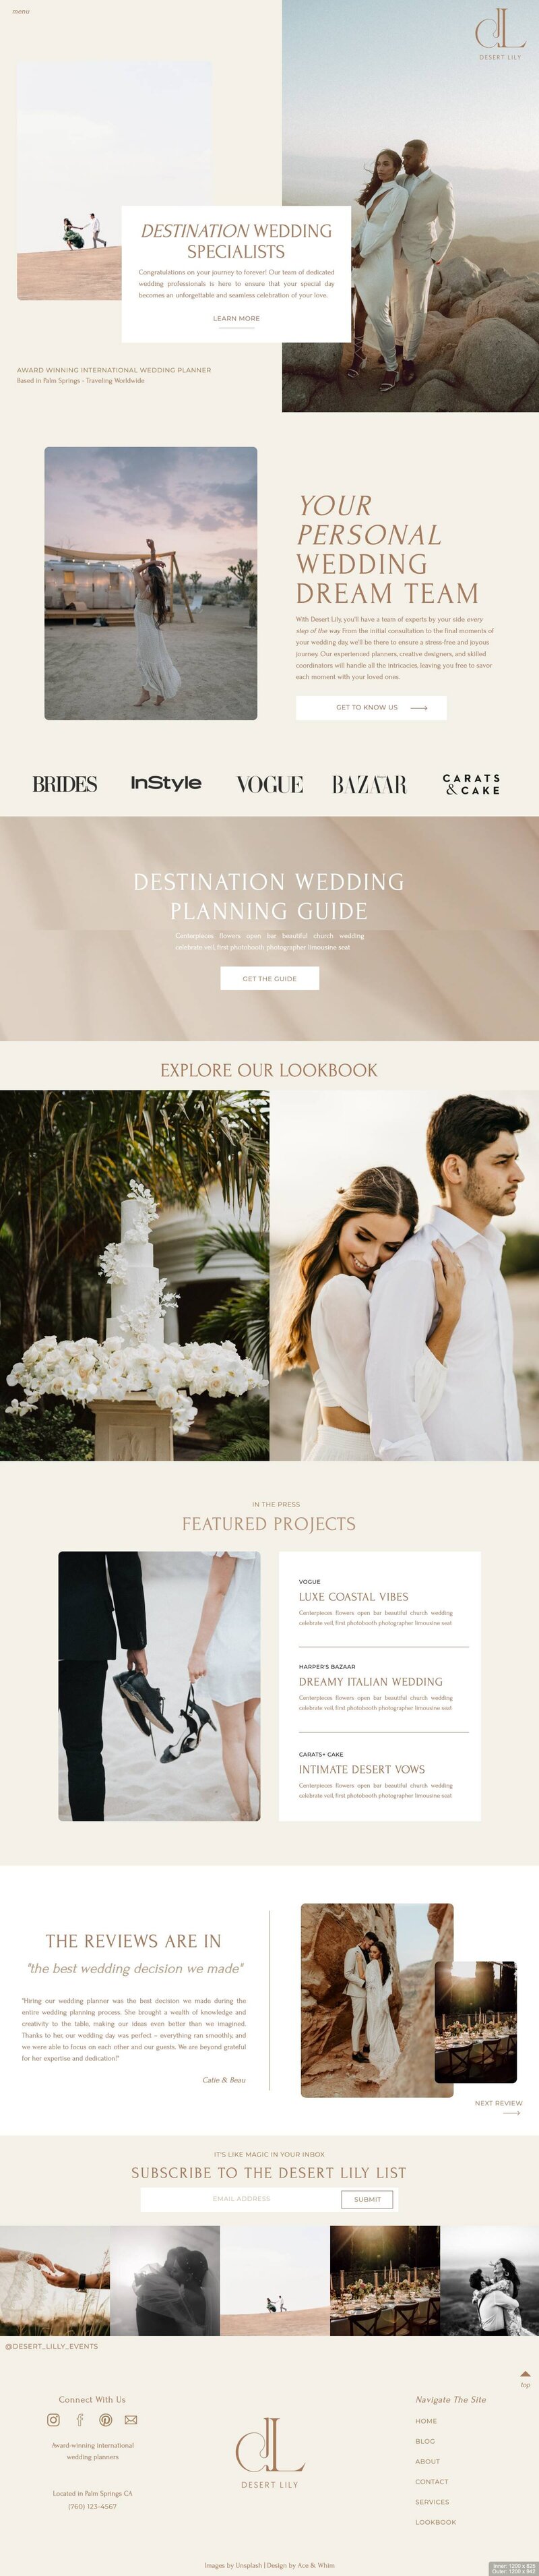 Customizable showit template for wedding professionals